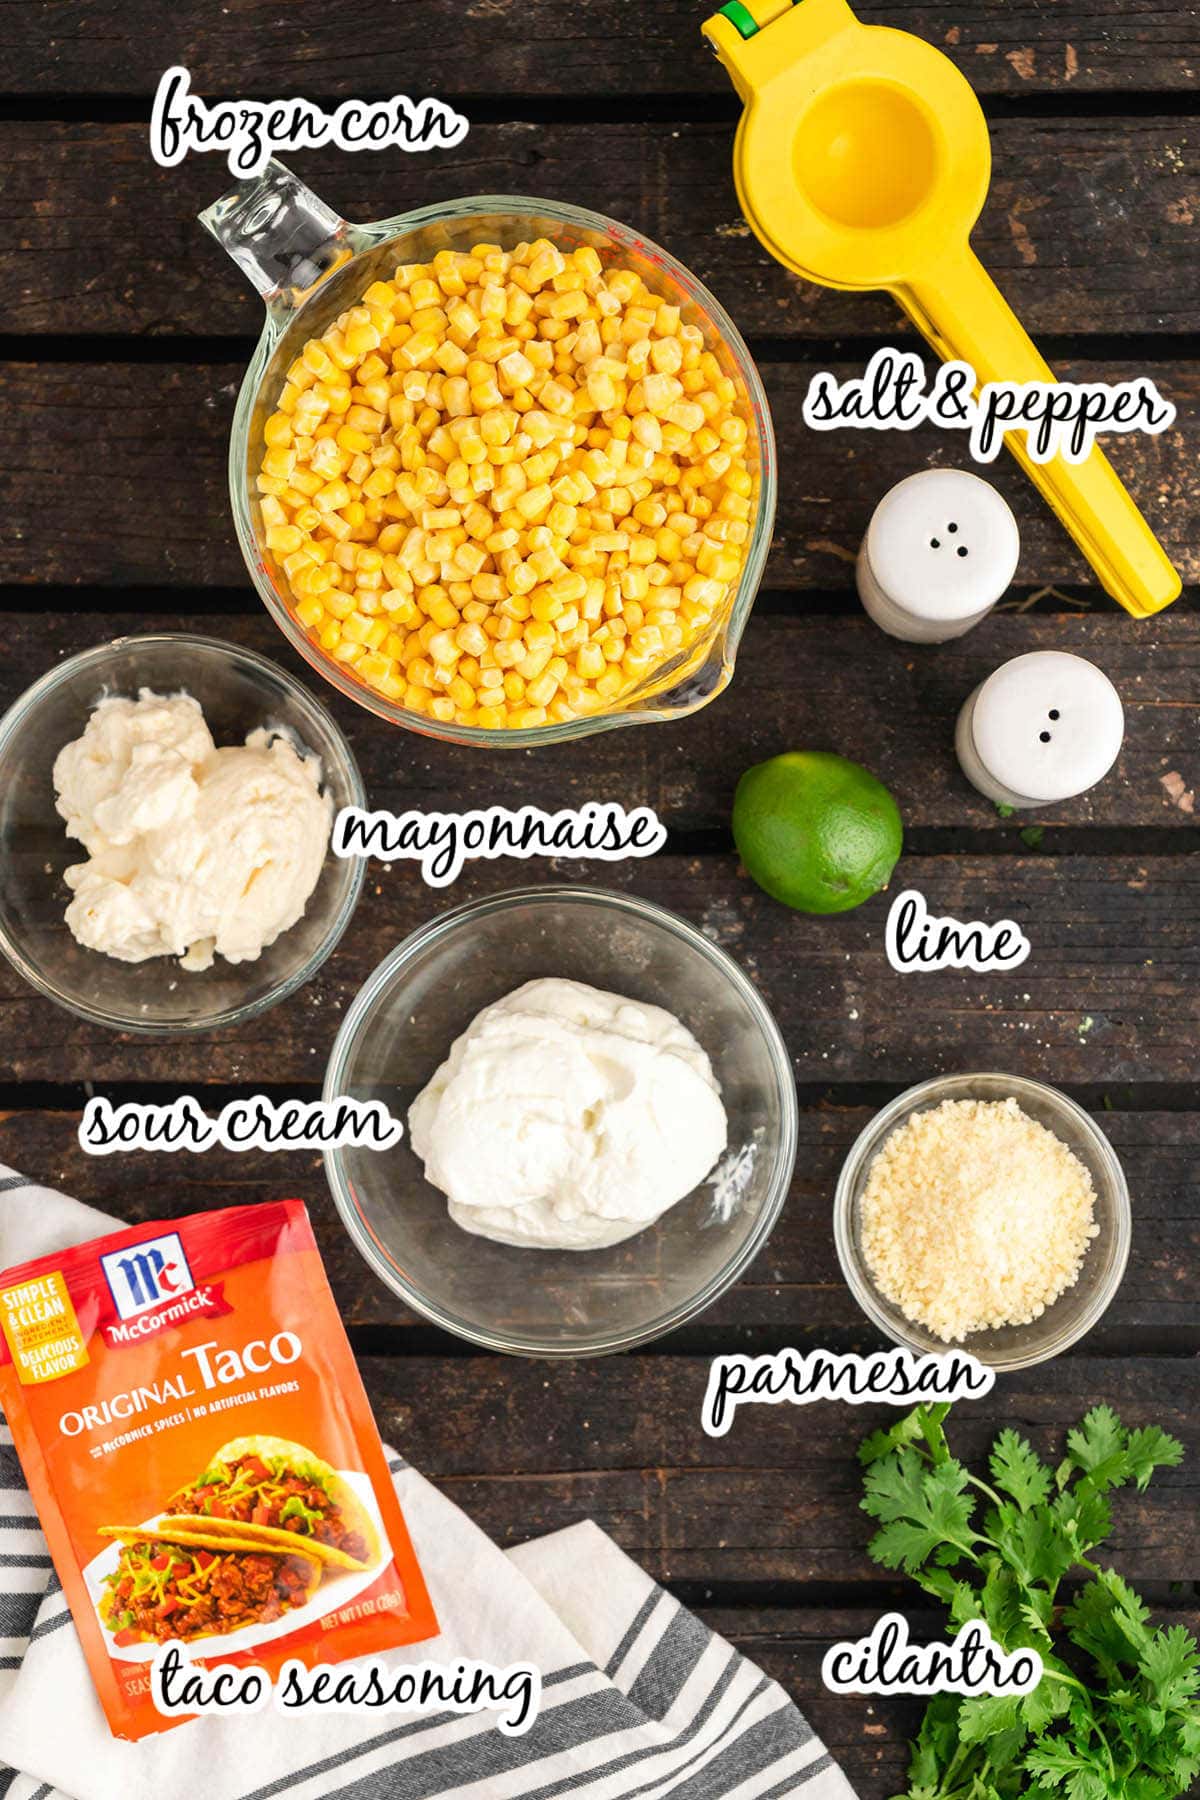 Ingredients to make corn casserole with print overlay.